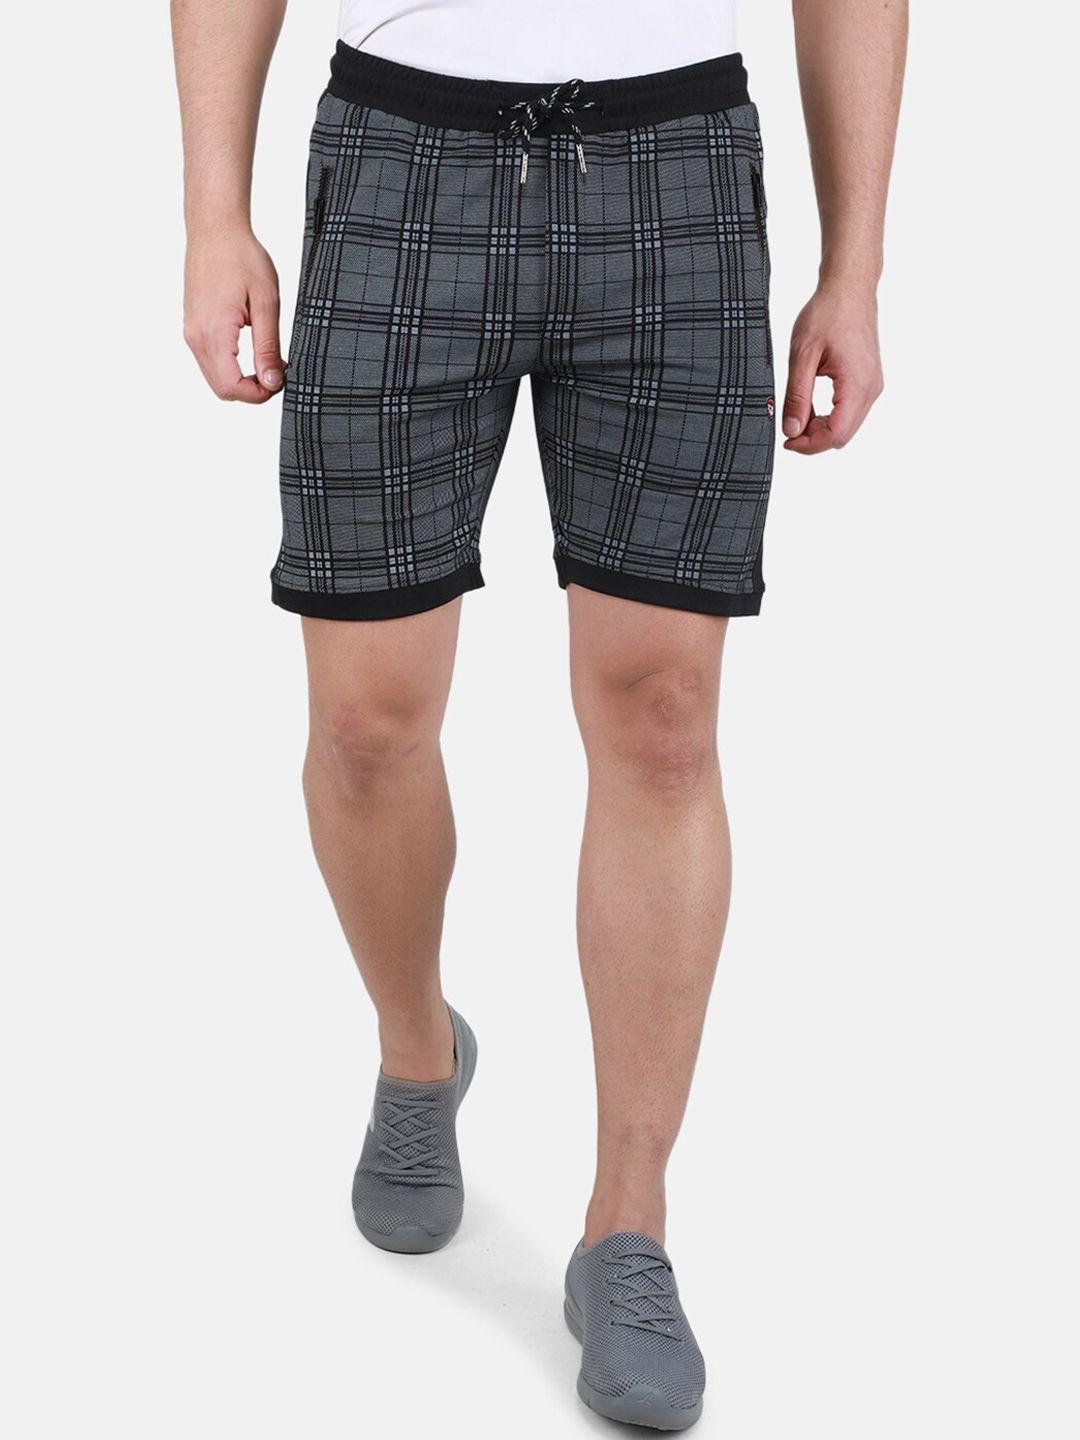 monte-carlo-men-mid-rise-checked-shorts-with-zip-pockets